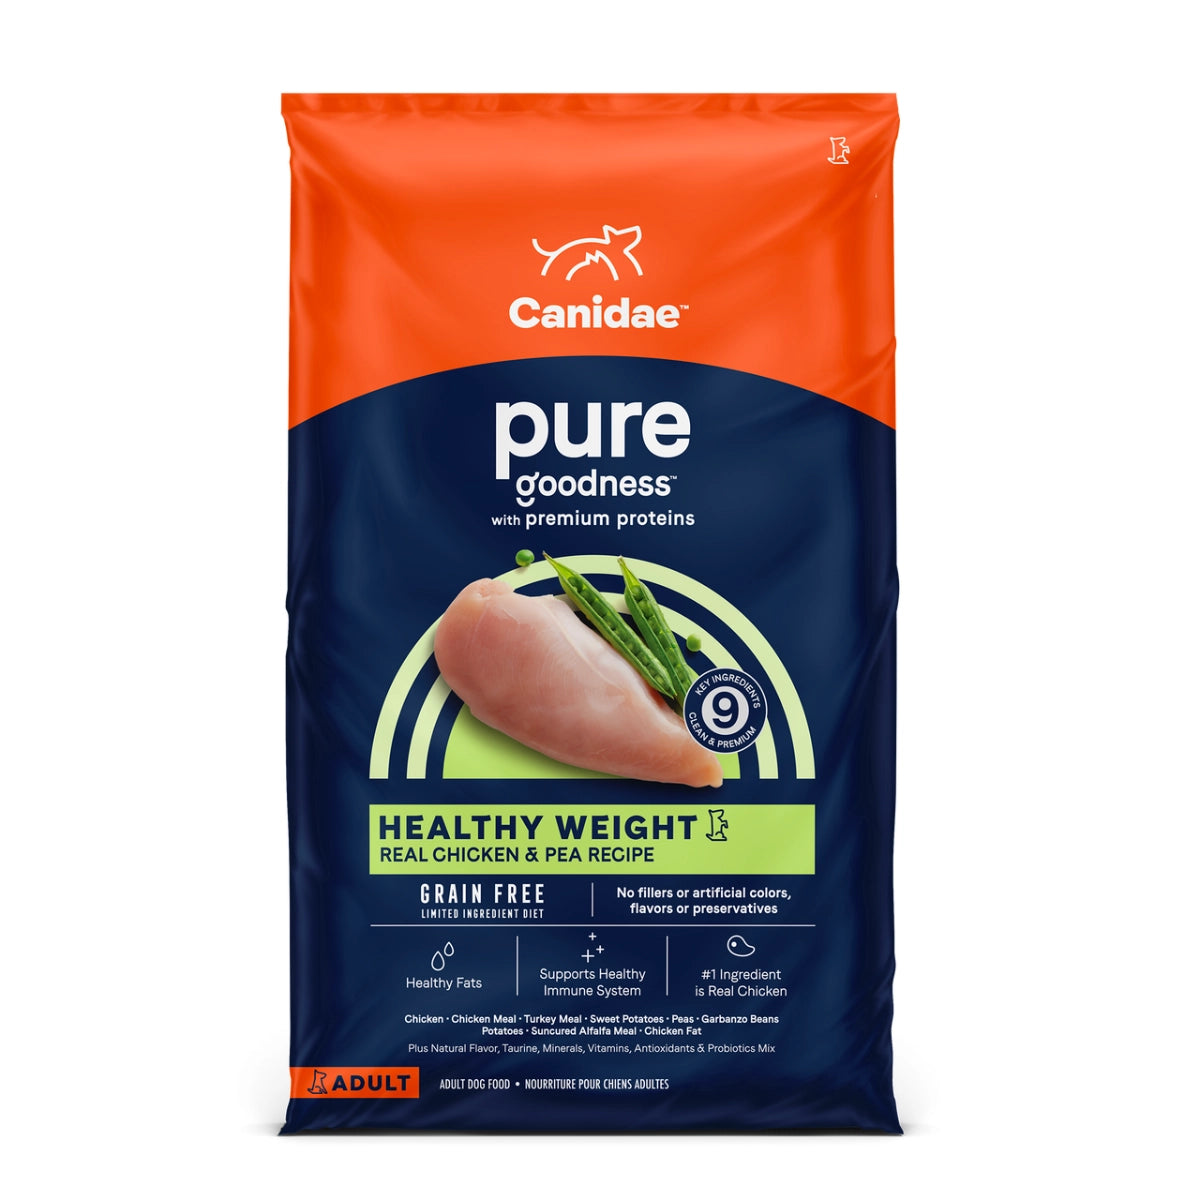 Canidae | PURE Grain Free Dry Dog Food for Healthy Weight | Vetopia